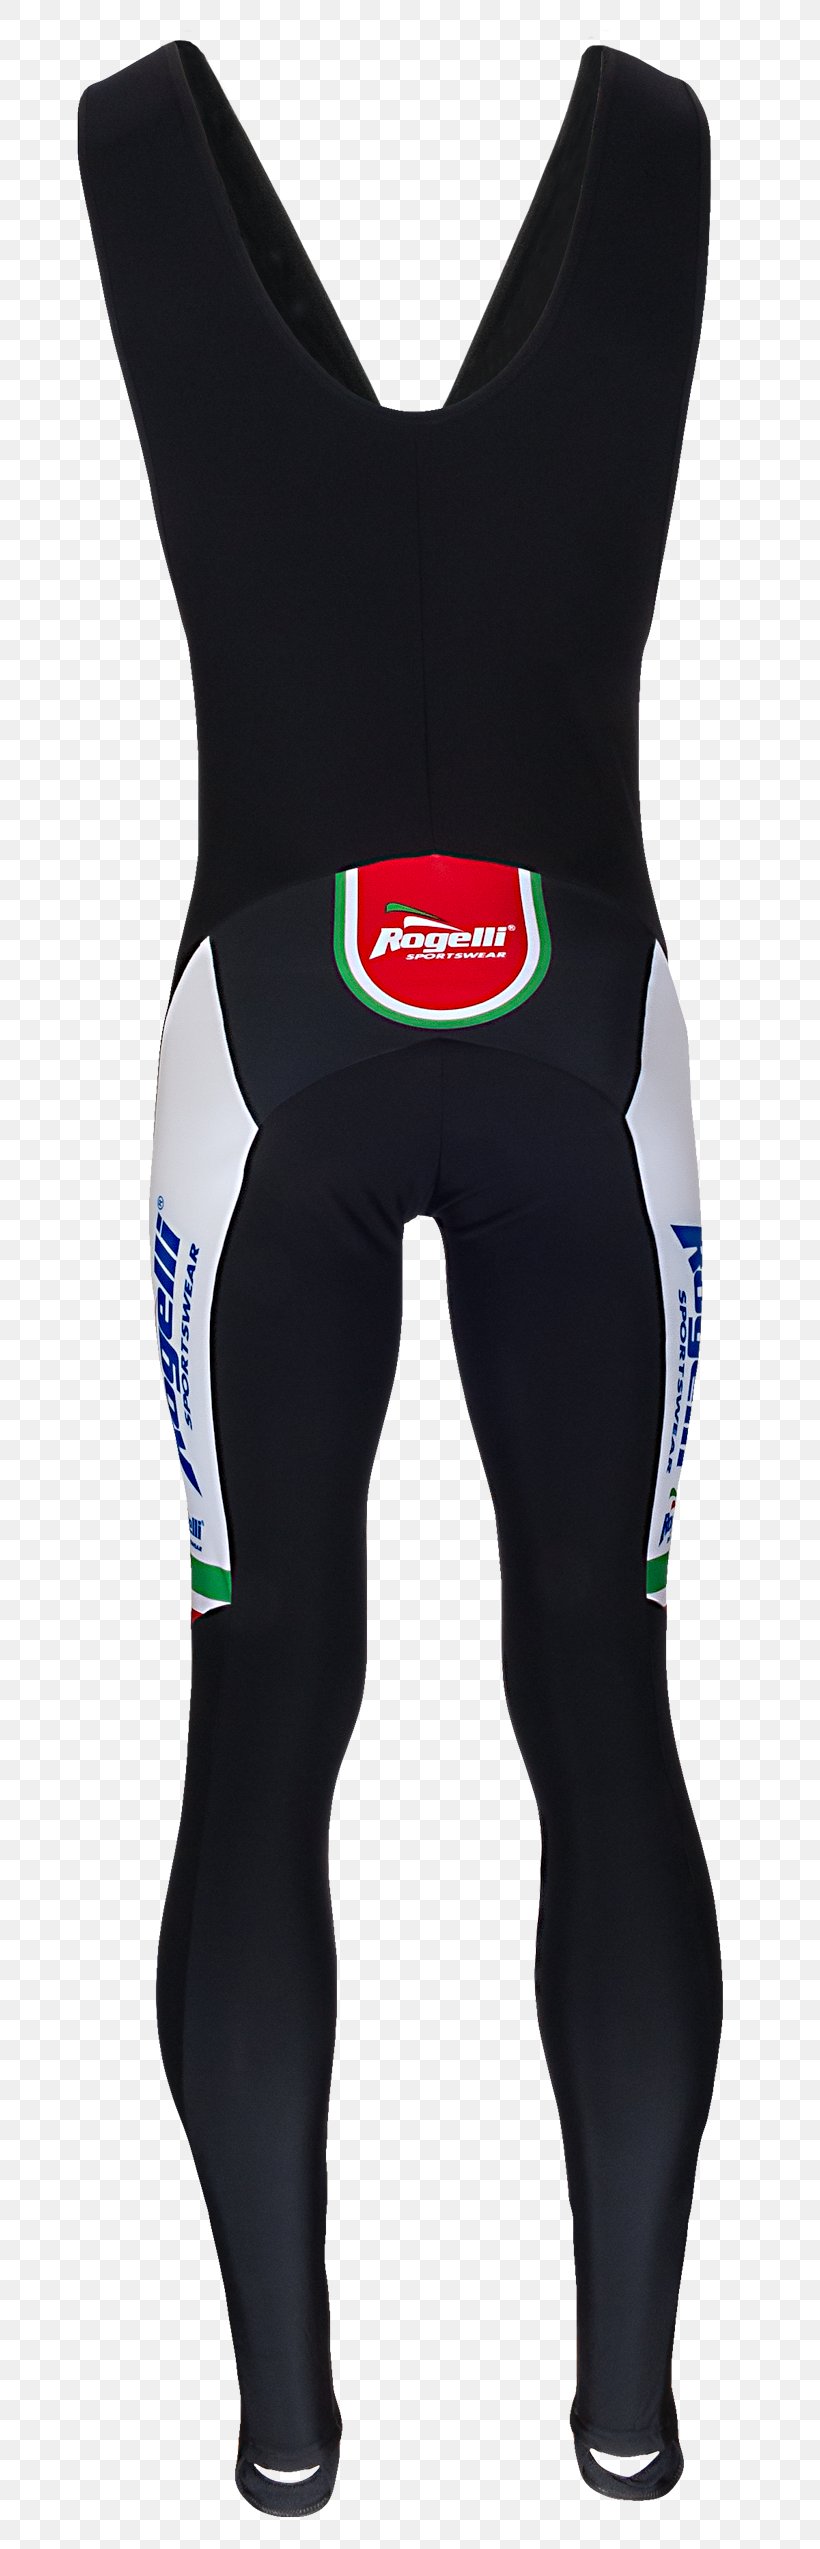 Wetsuit Uniform Tights, PNG, 700x2549px, Wetsuit, Personal Protective Equipment, Sport, Sports Uniform, Tights Download Free